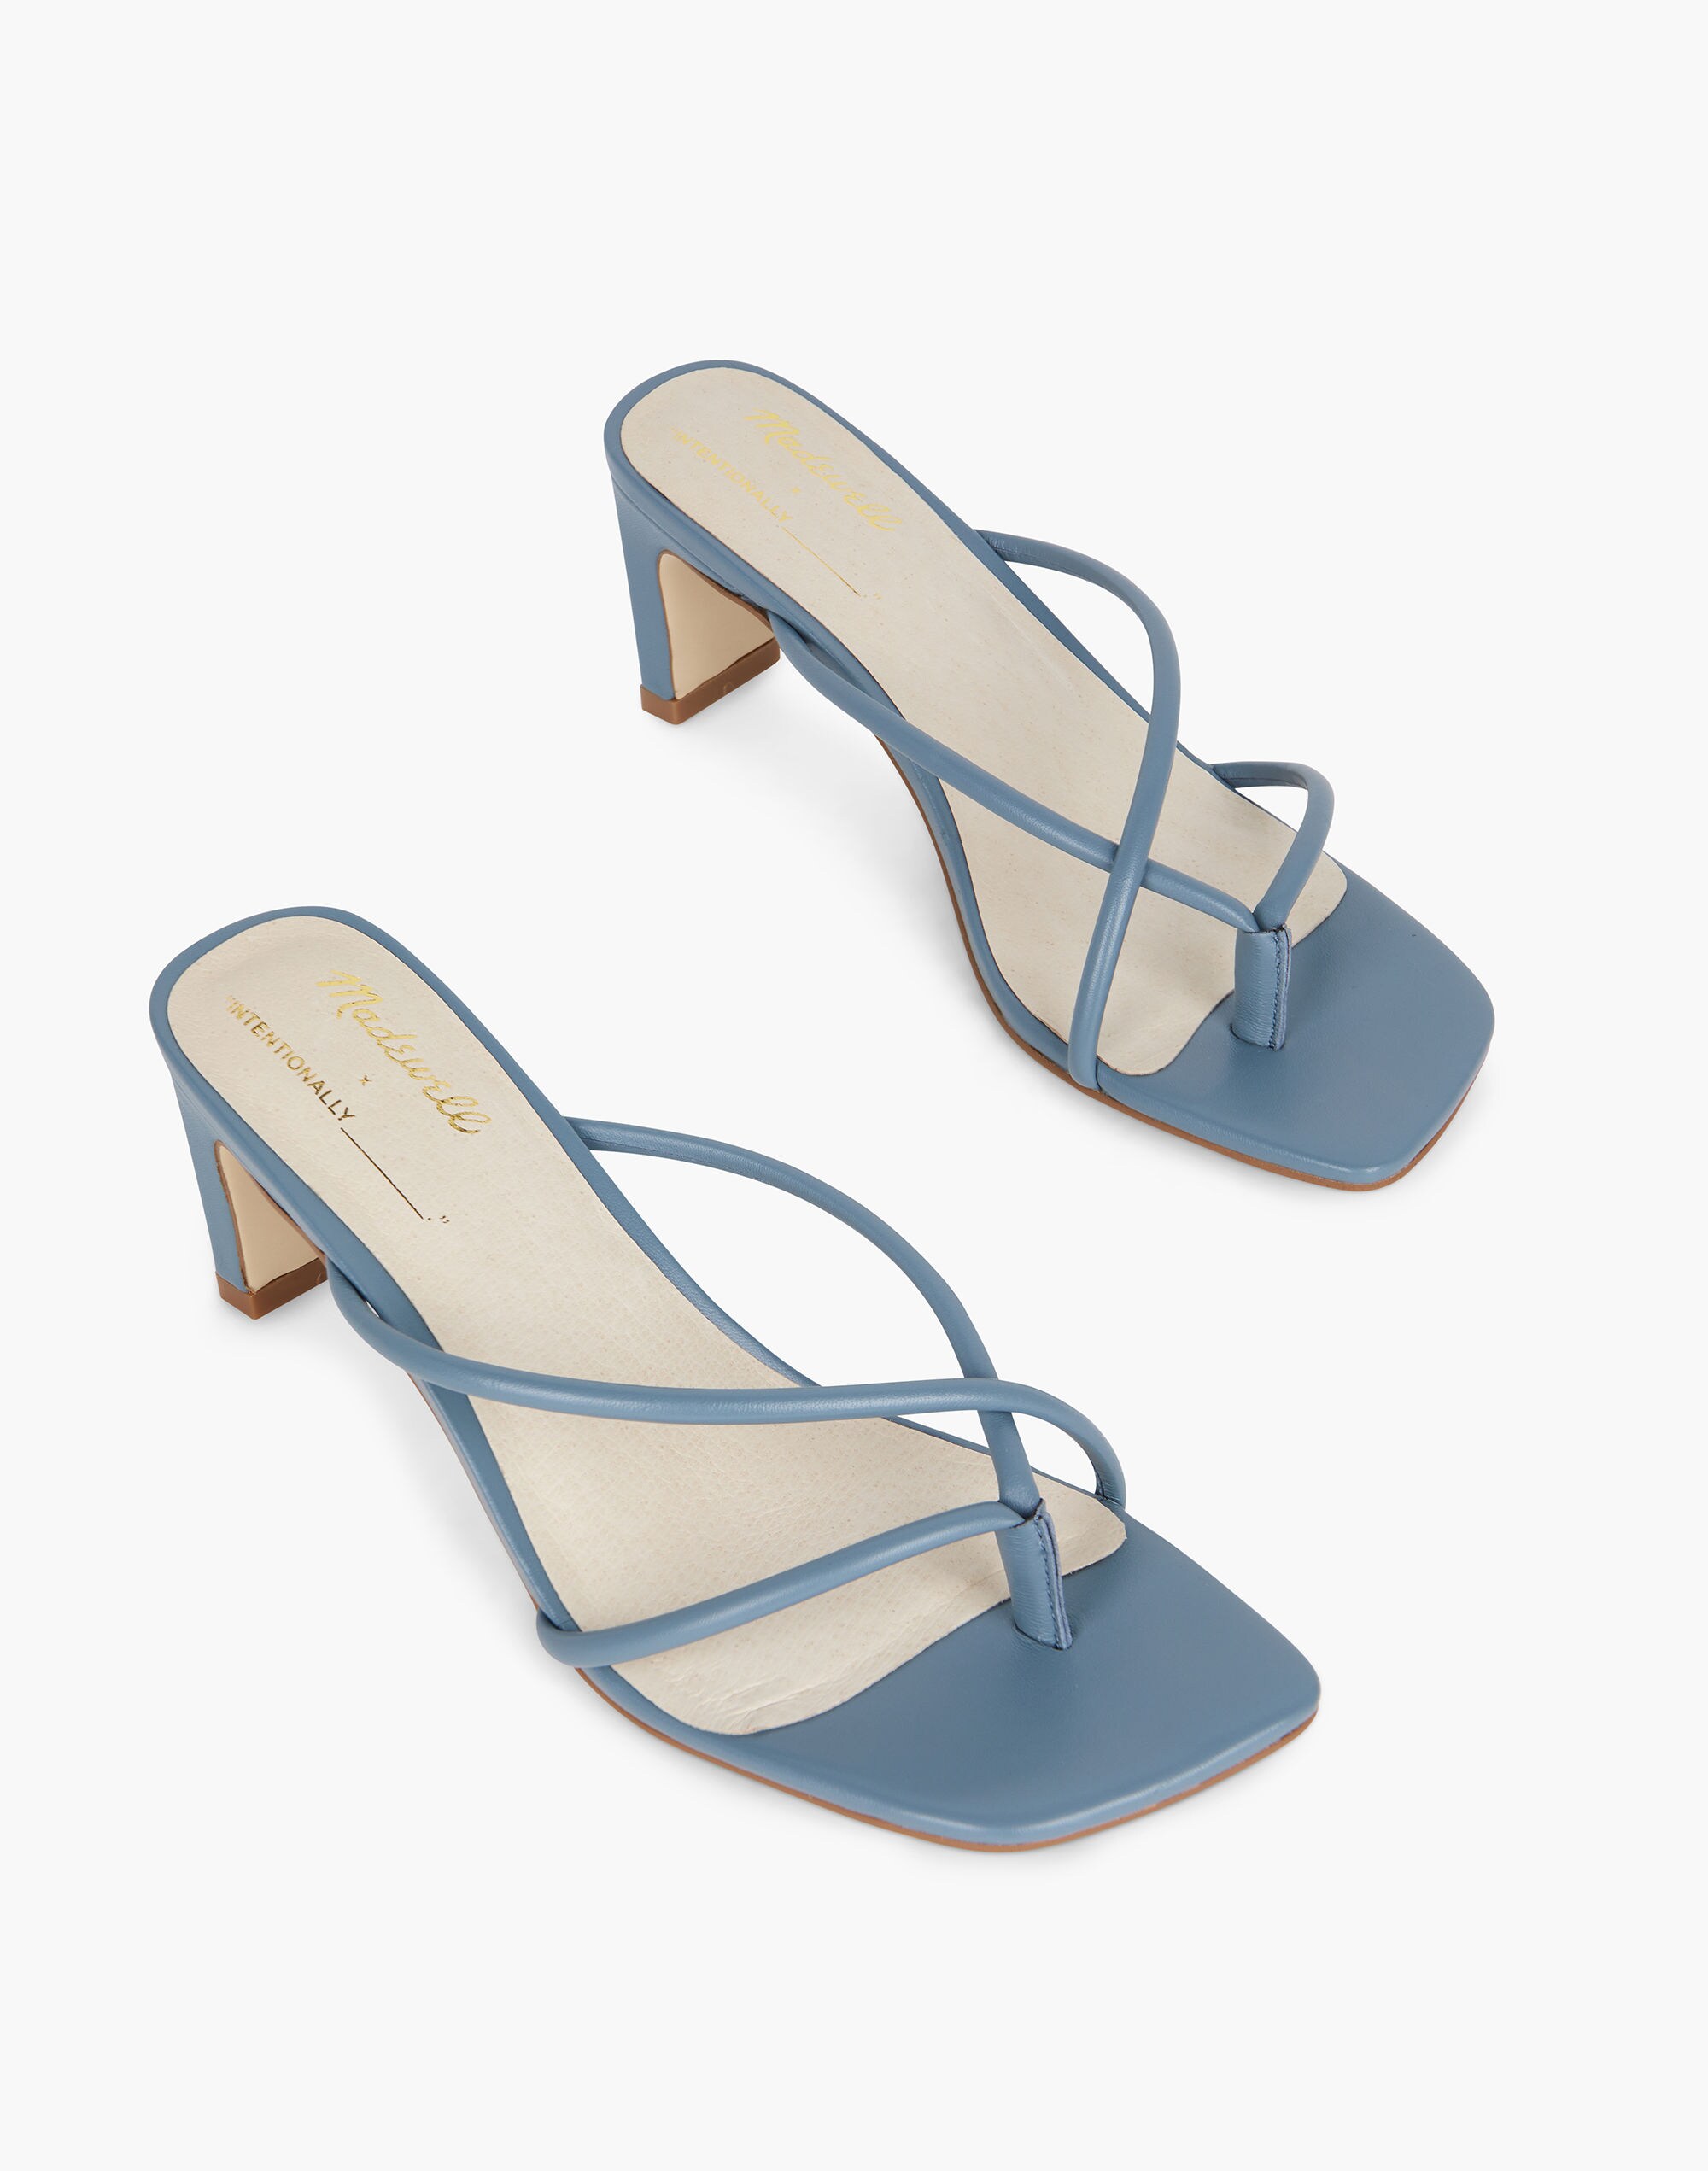 Madewell x Intentionally Blank Kelon Sandals in Robins Egg